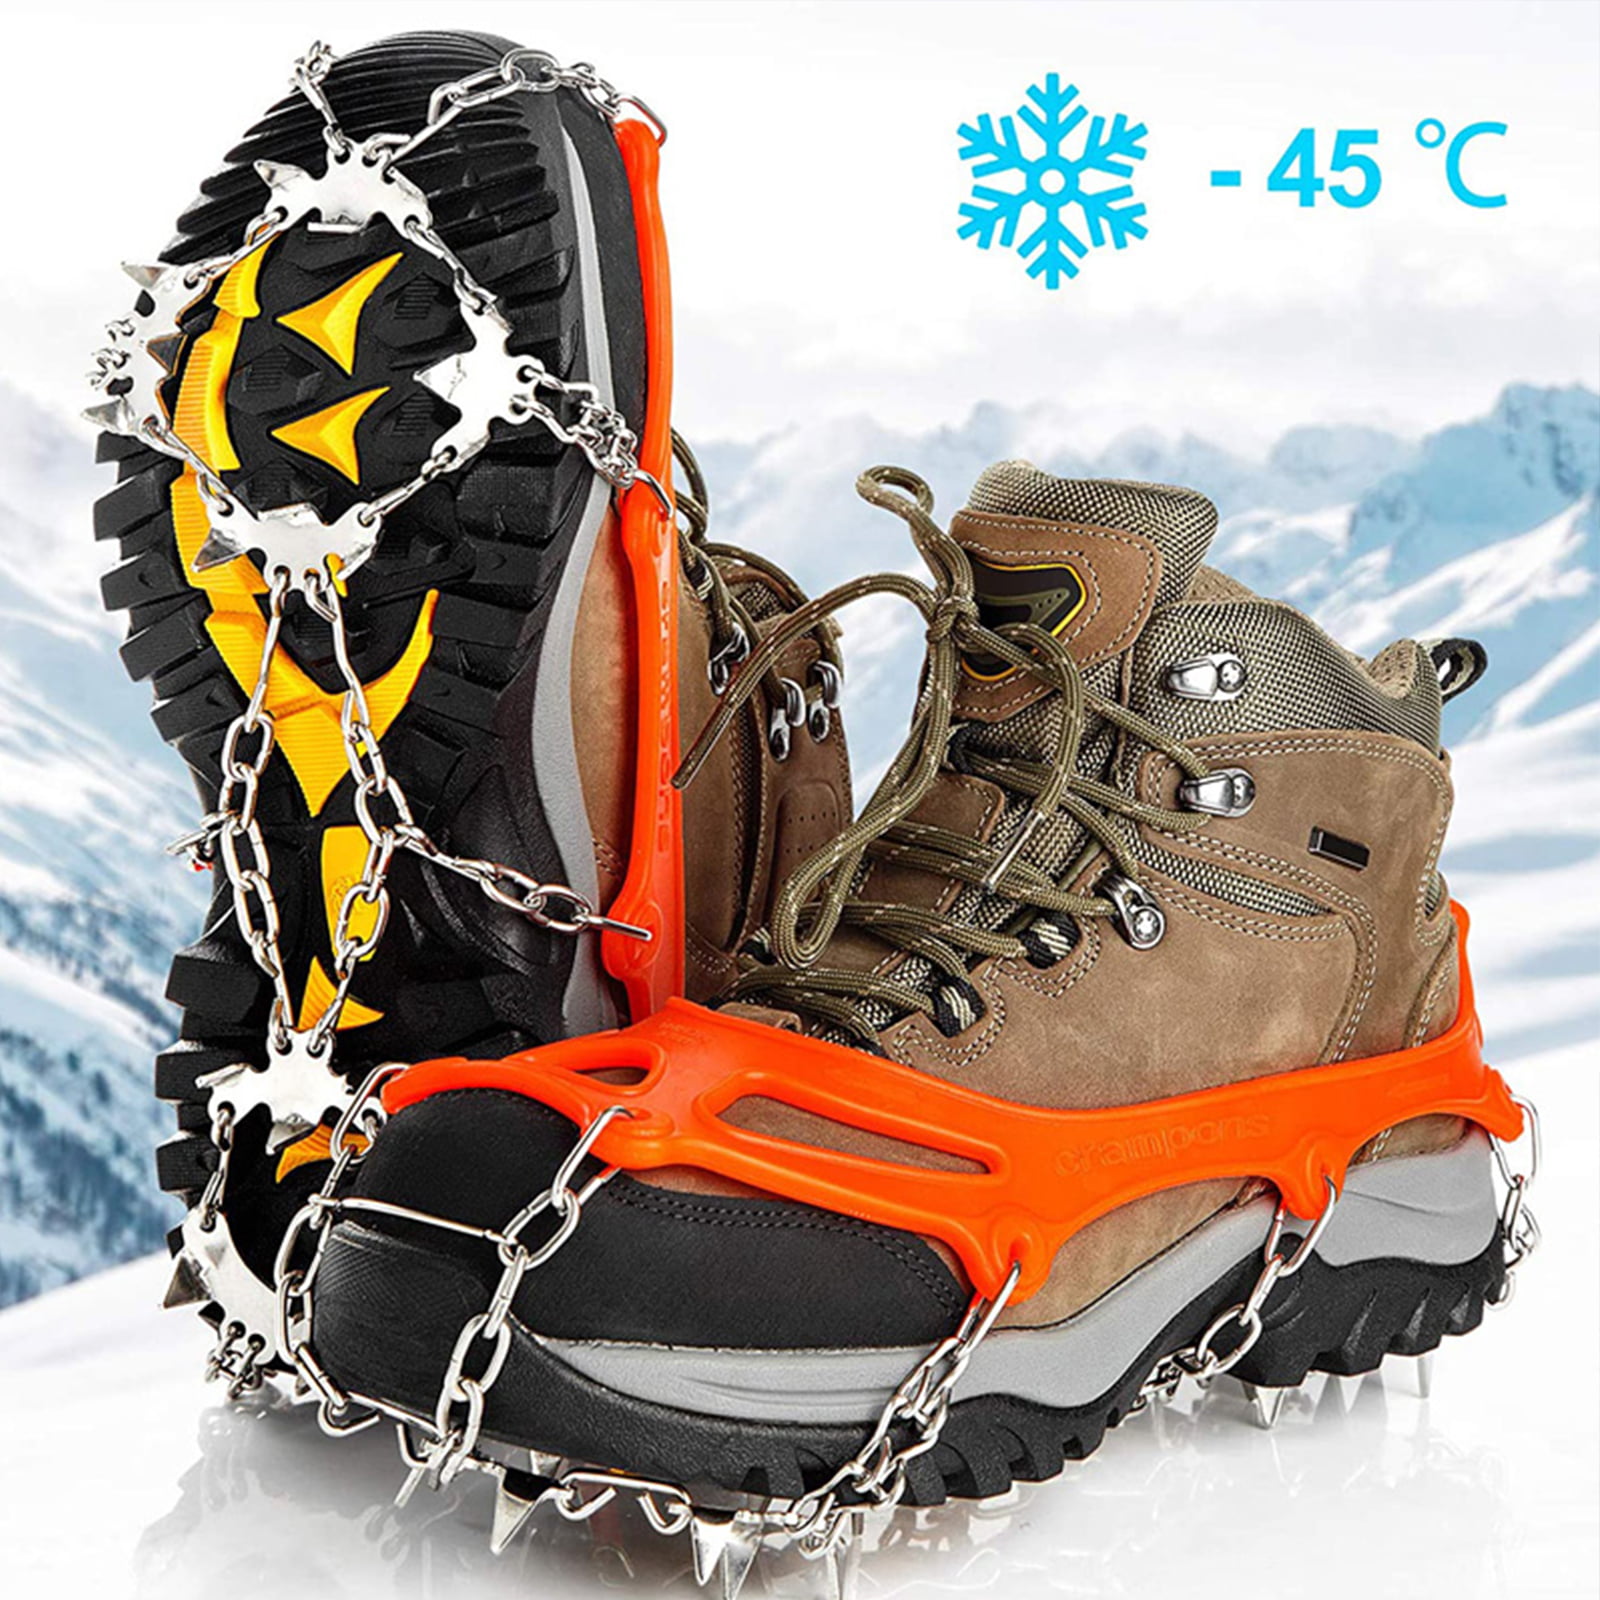 Walking Climbing Mountaineering Jogging or Fishing Crampons Snow Safe Grips Ice Cleat Traction for Shoes Boots Men Women Kids Anti Slip Stainless Steel Spikes System Adapt Hiking 